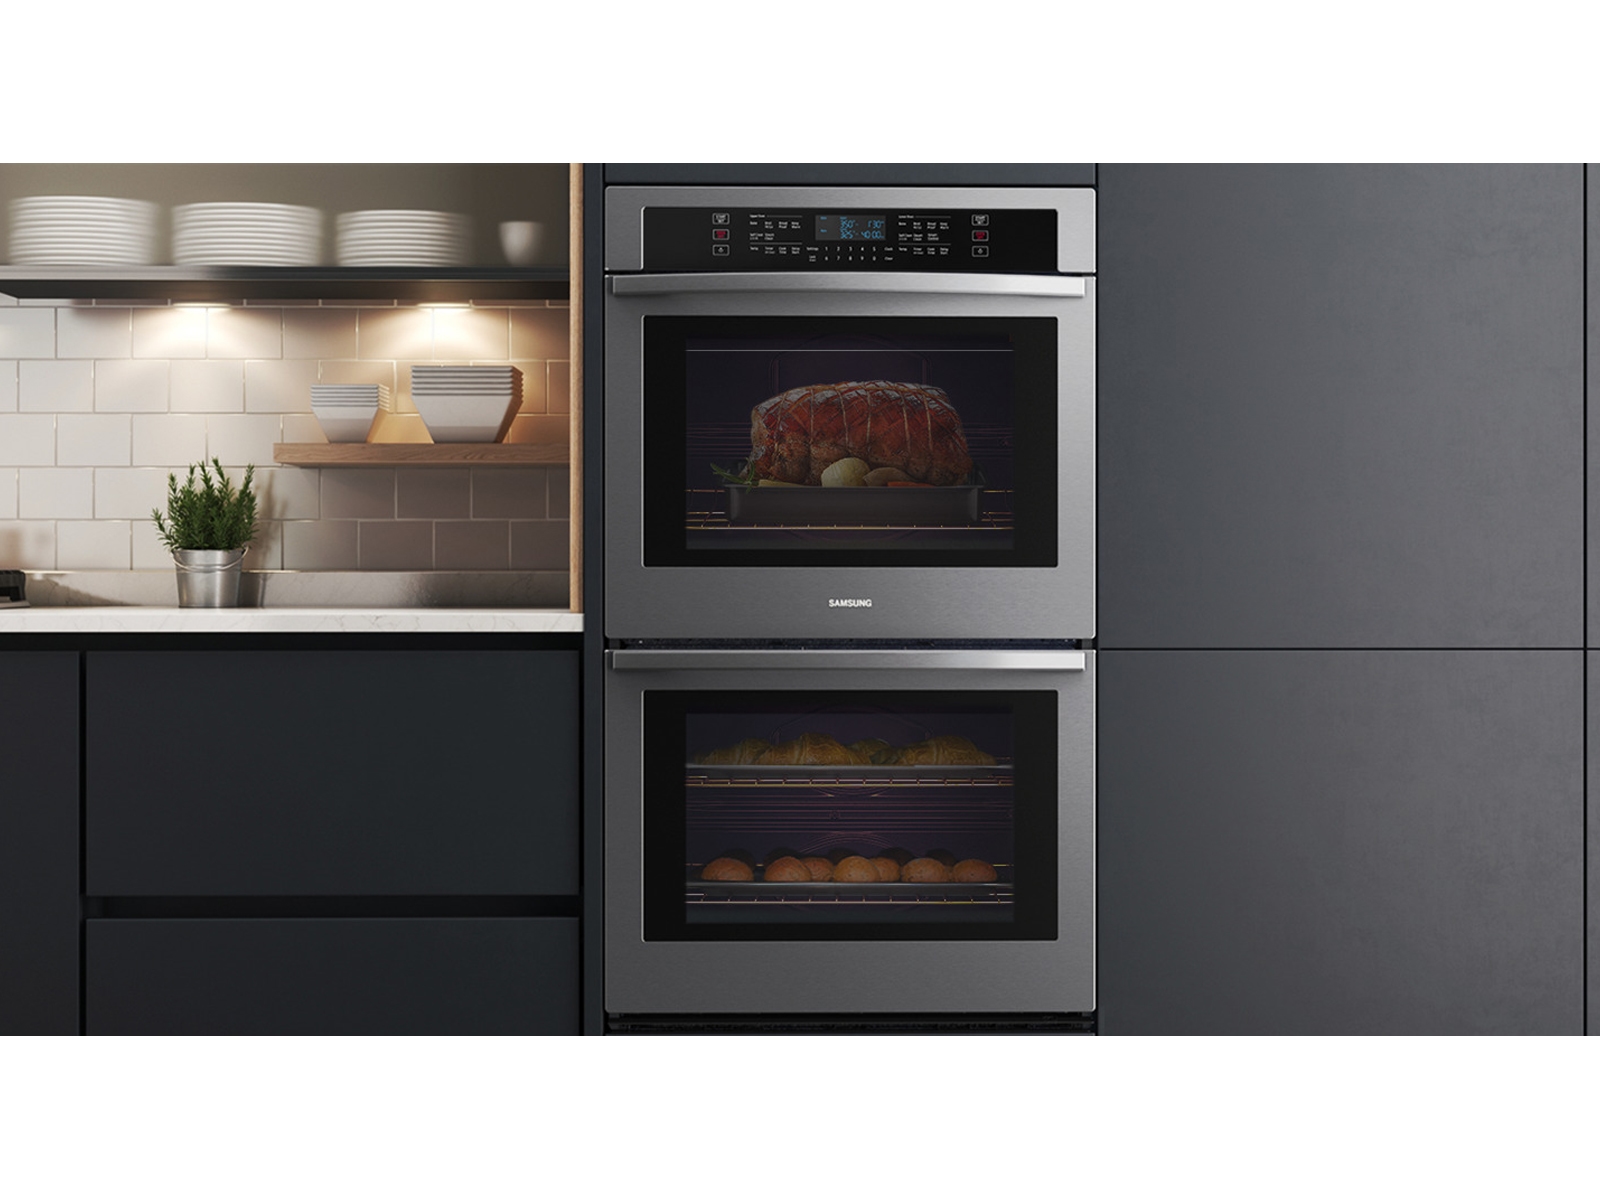 https://image-us.samsung.com/SamsungUS/home/home-appliances/wall-ovens/pdp/09-10-2020/09-27-2020/Value-Built-in_NV51T5511DS_01_Large-Capacity.jpg?$product-details-jpg$